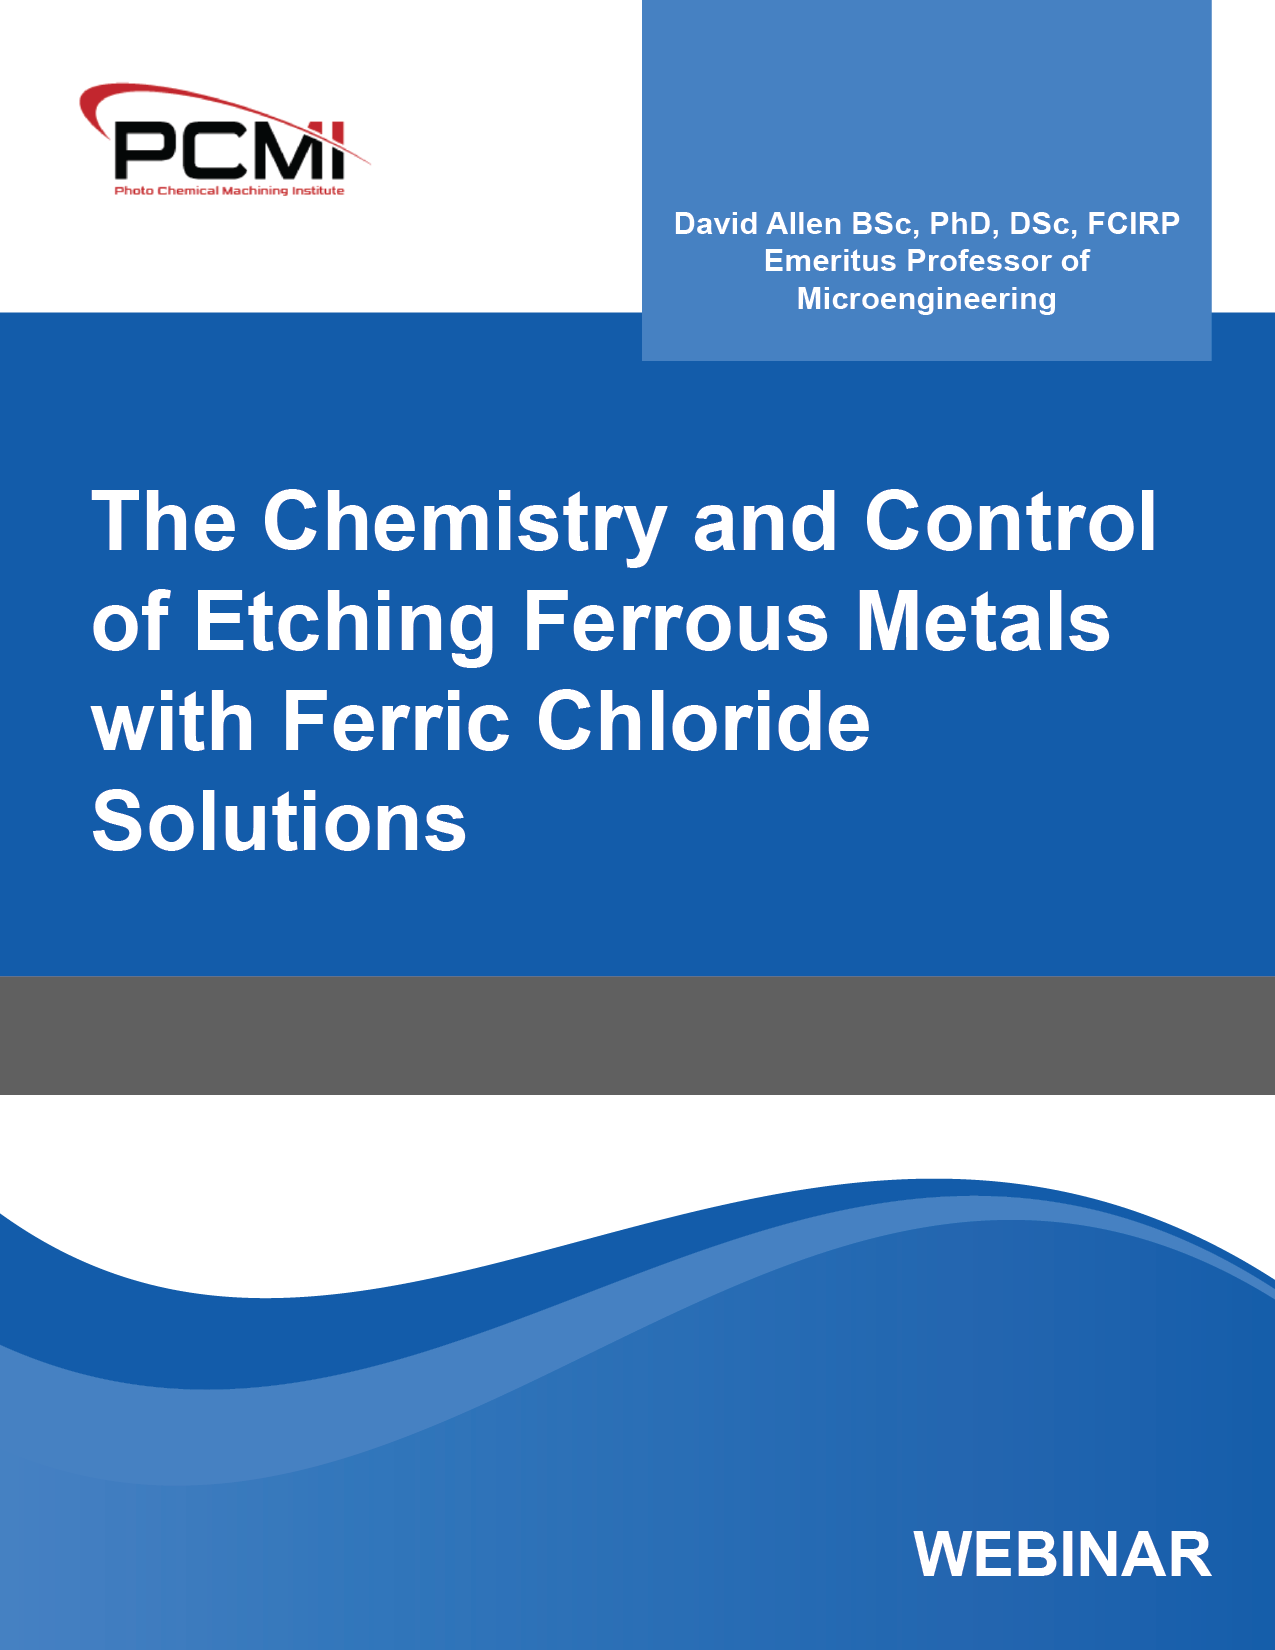 The Chemistry and Control of Etching Ferrous Metals with Ferric Chloride Solutions